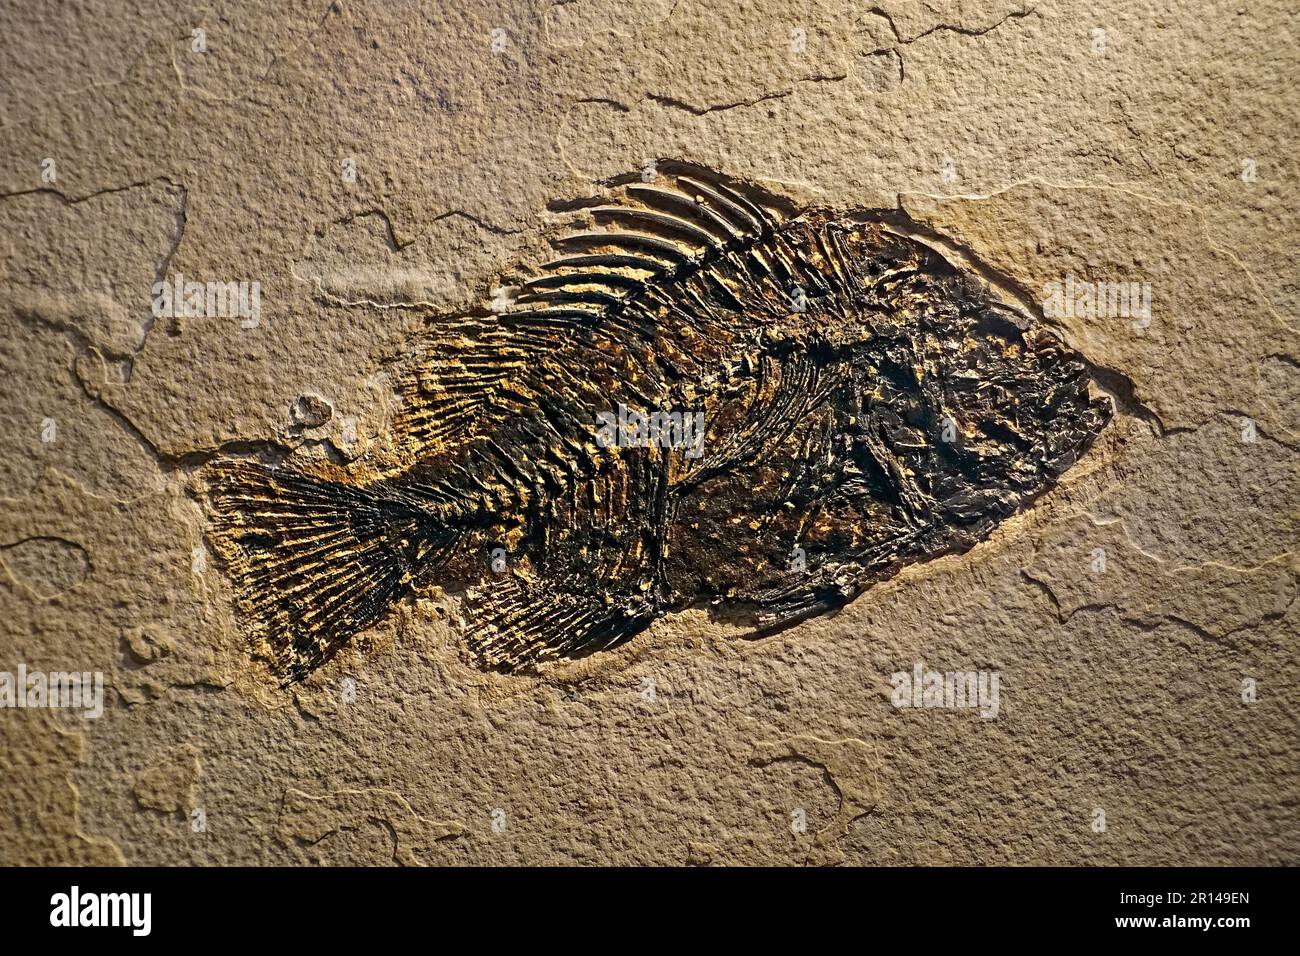 Cockerellites liops / Priscacara liops fossil, extinct temperate bass fish from early Eocene found in the Green River Formation of Wyoming, USA Stock Photo